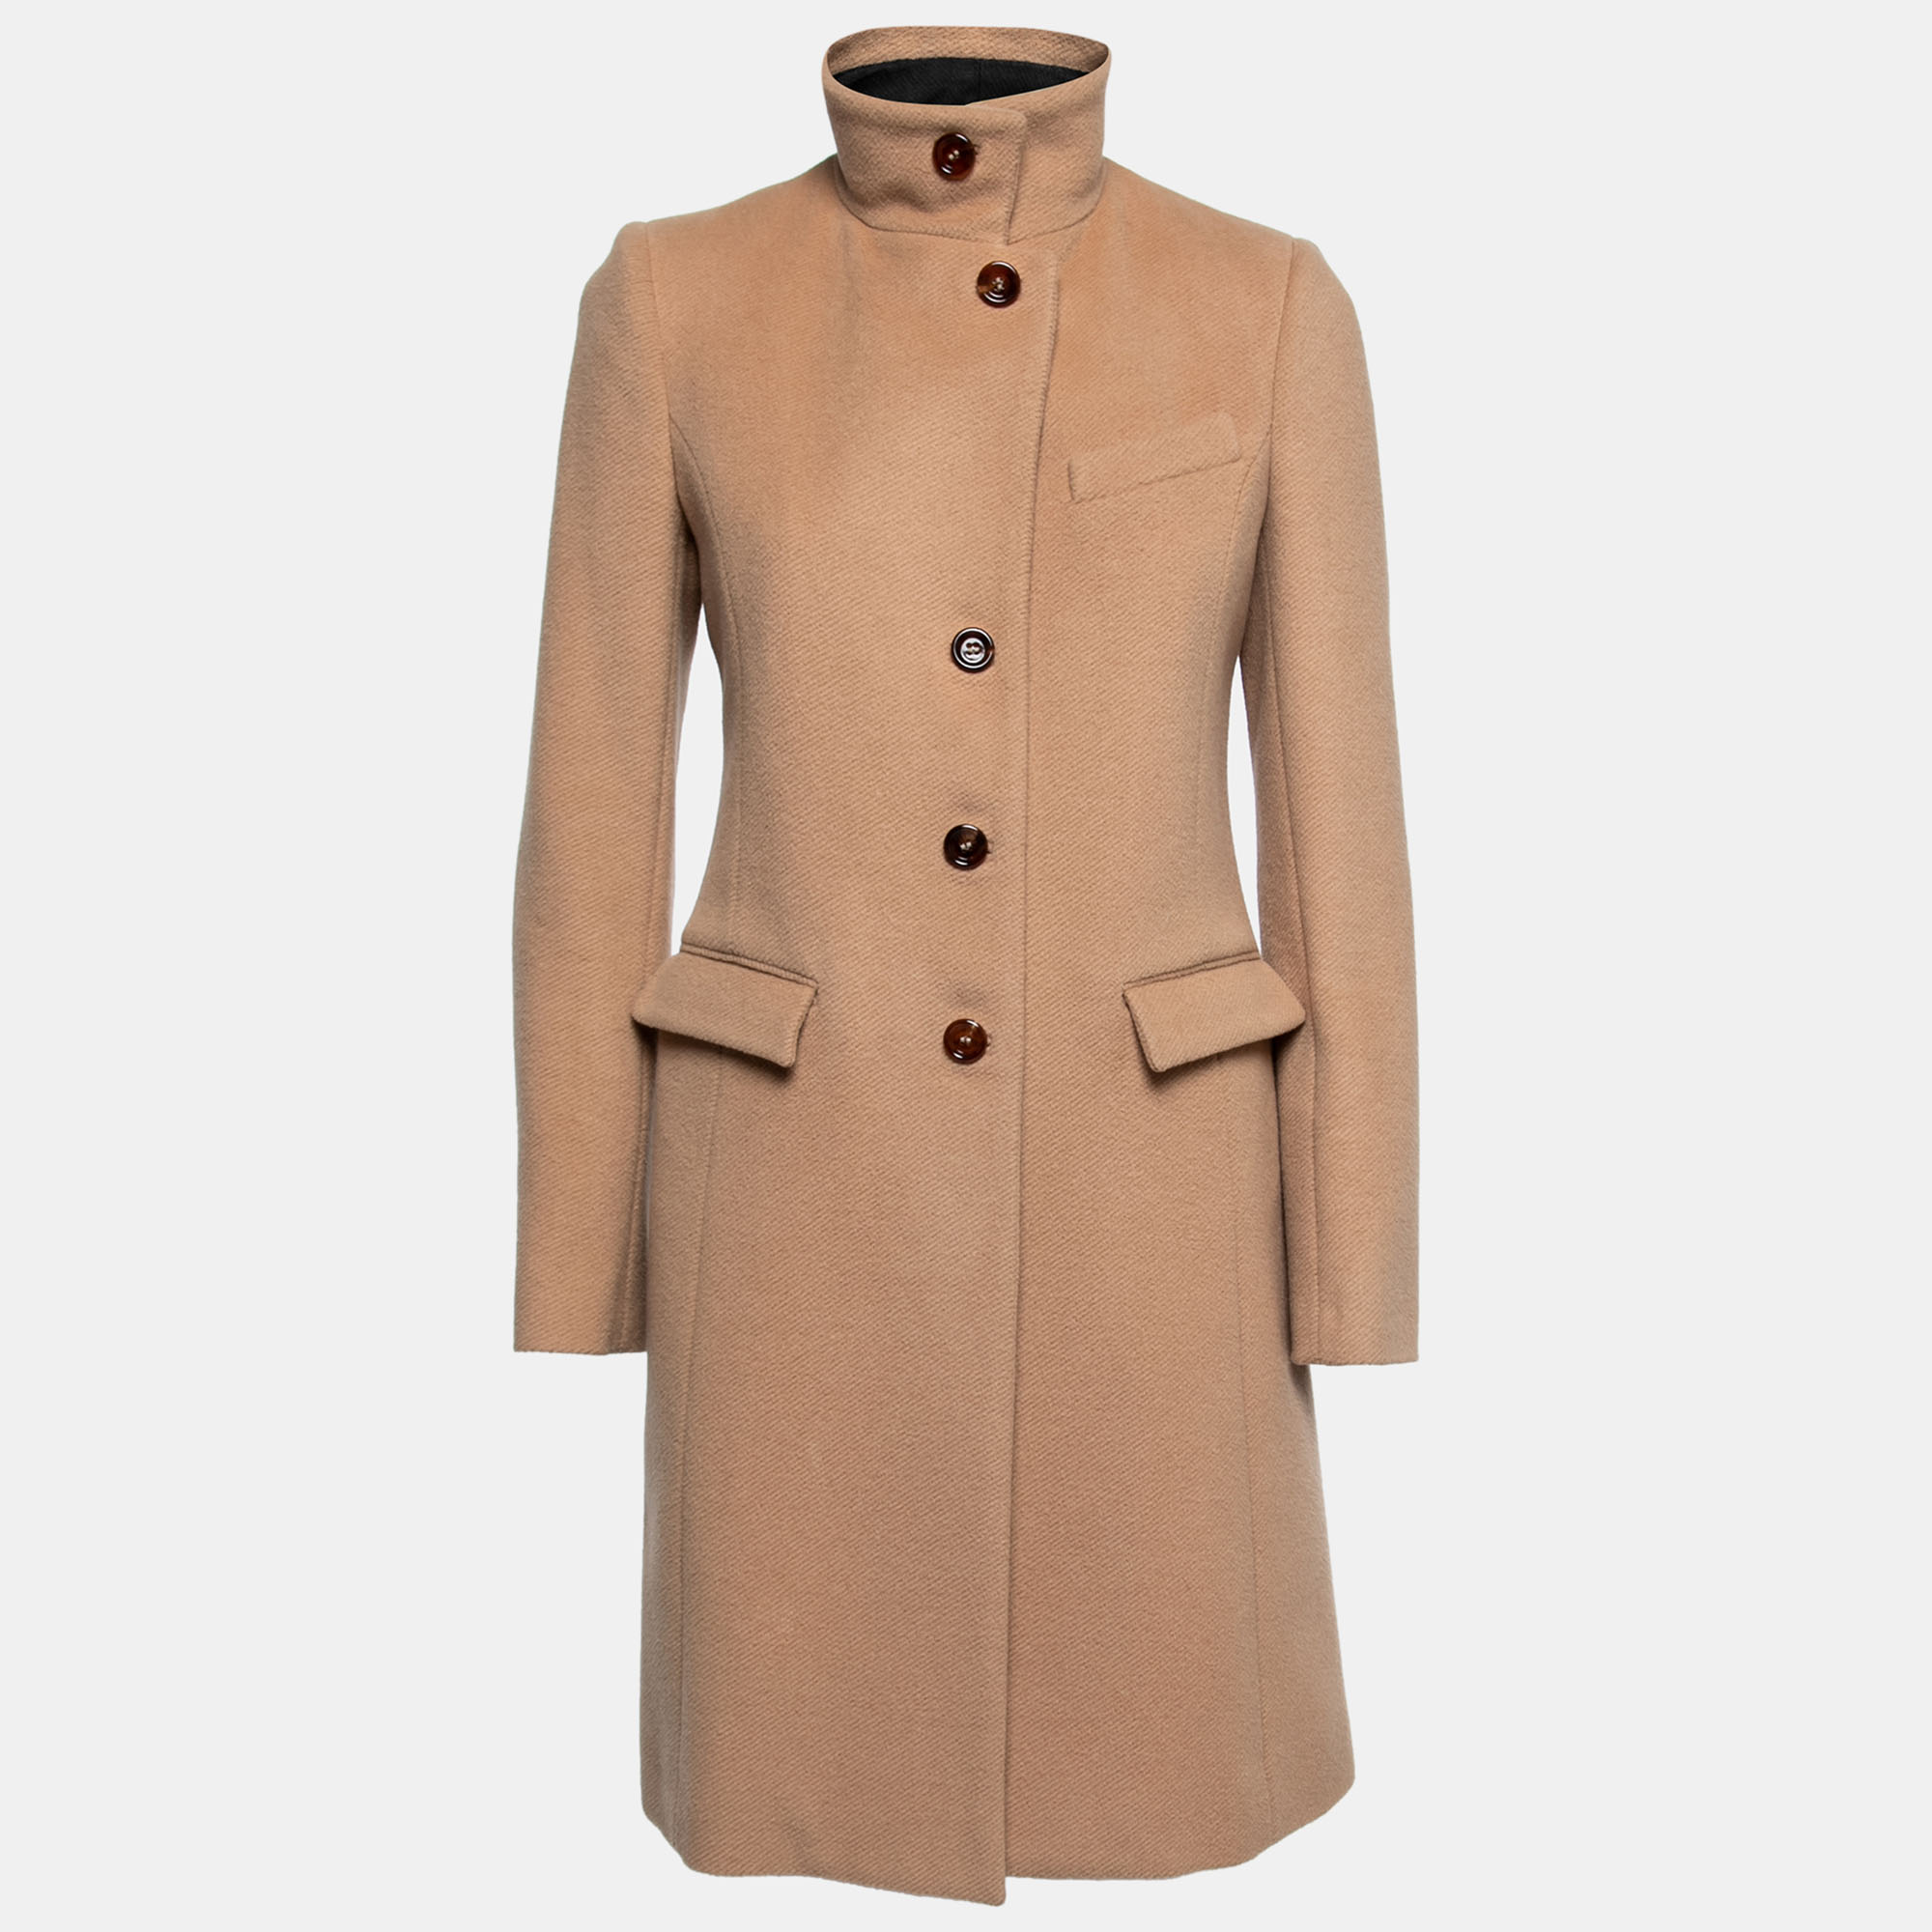 

Joseph Camel Brown Wool & Cashmere Single-Breasted Coat